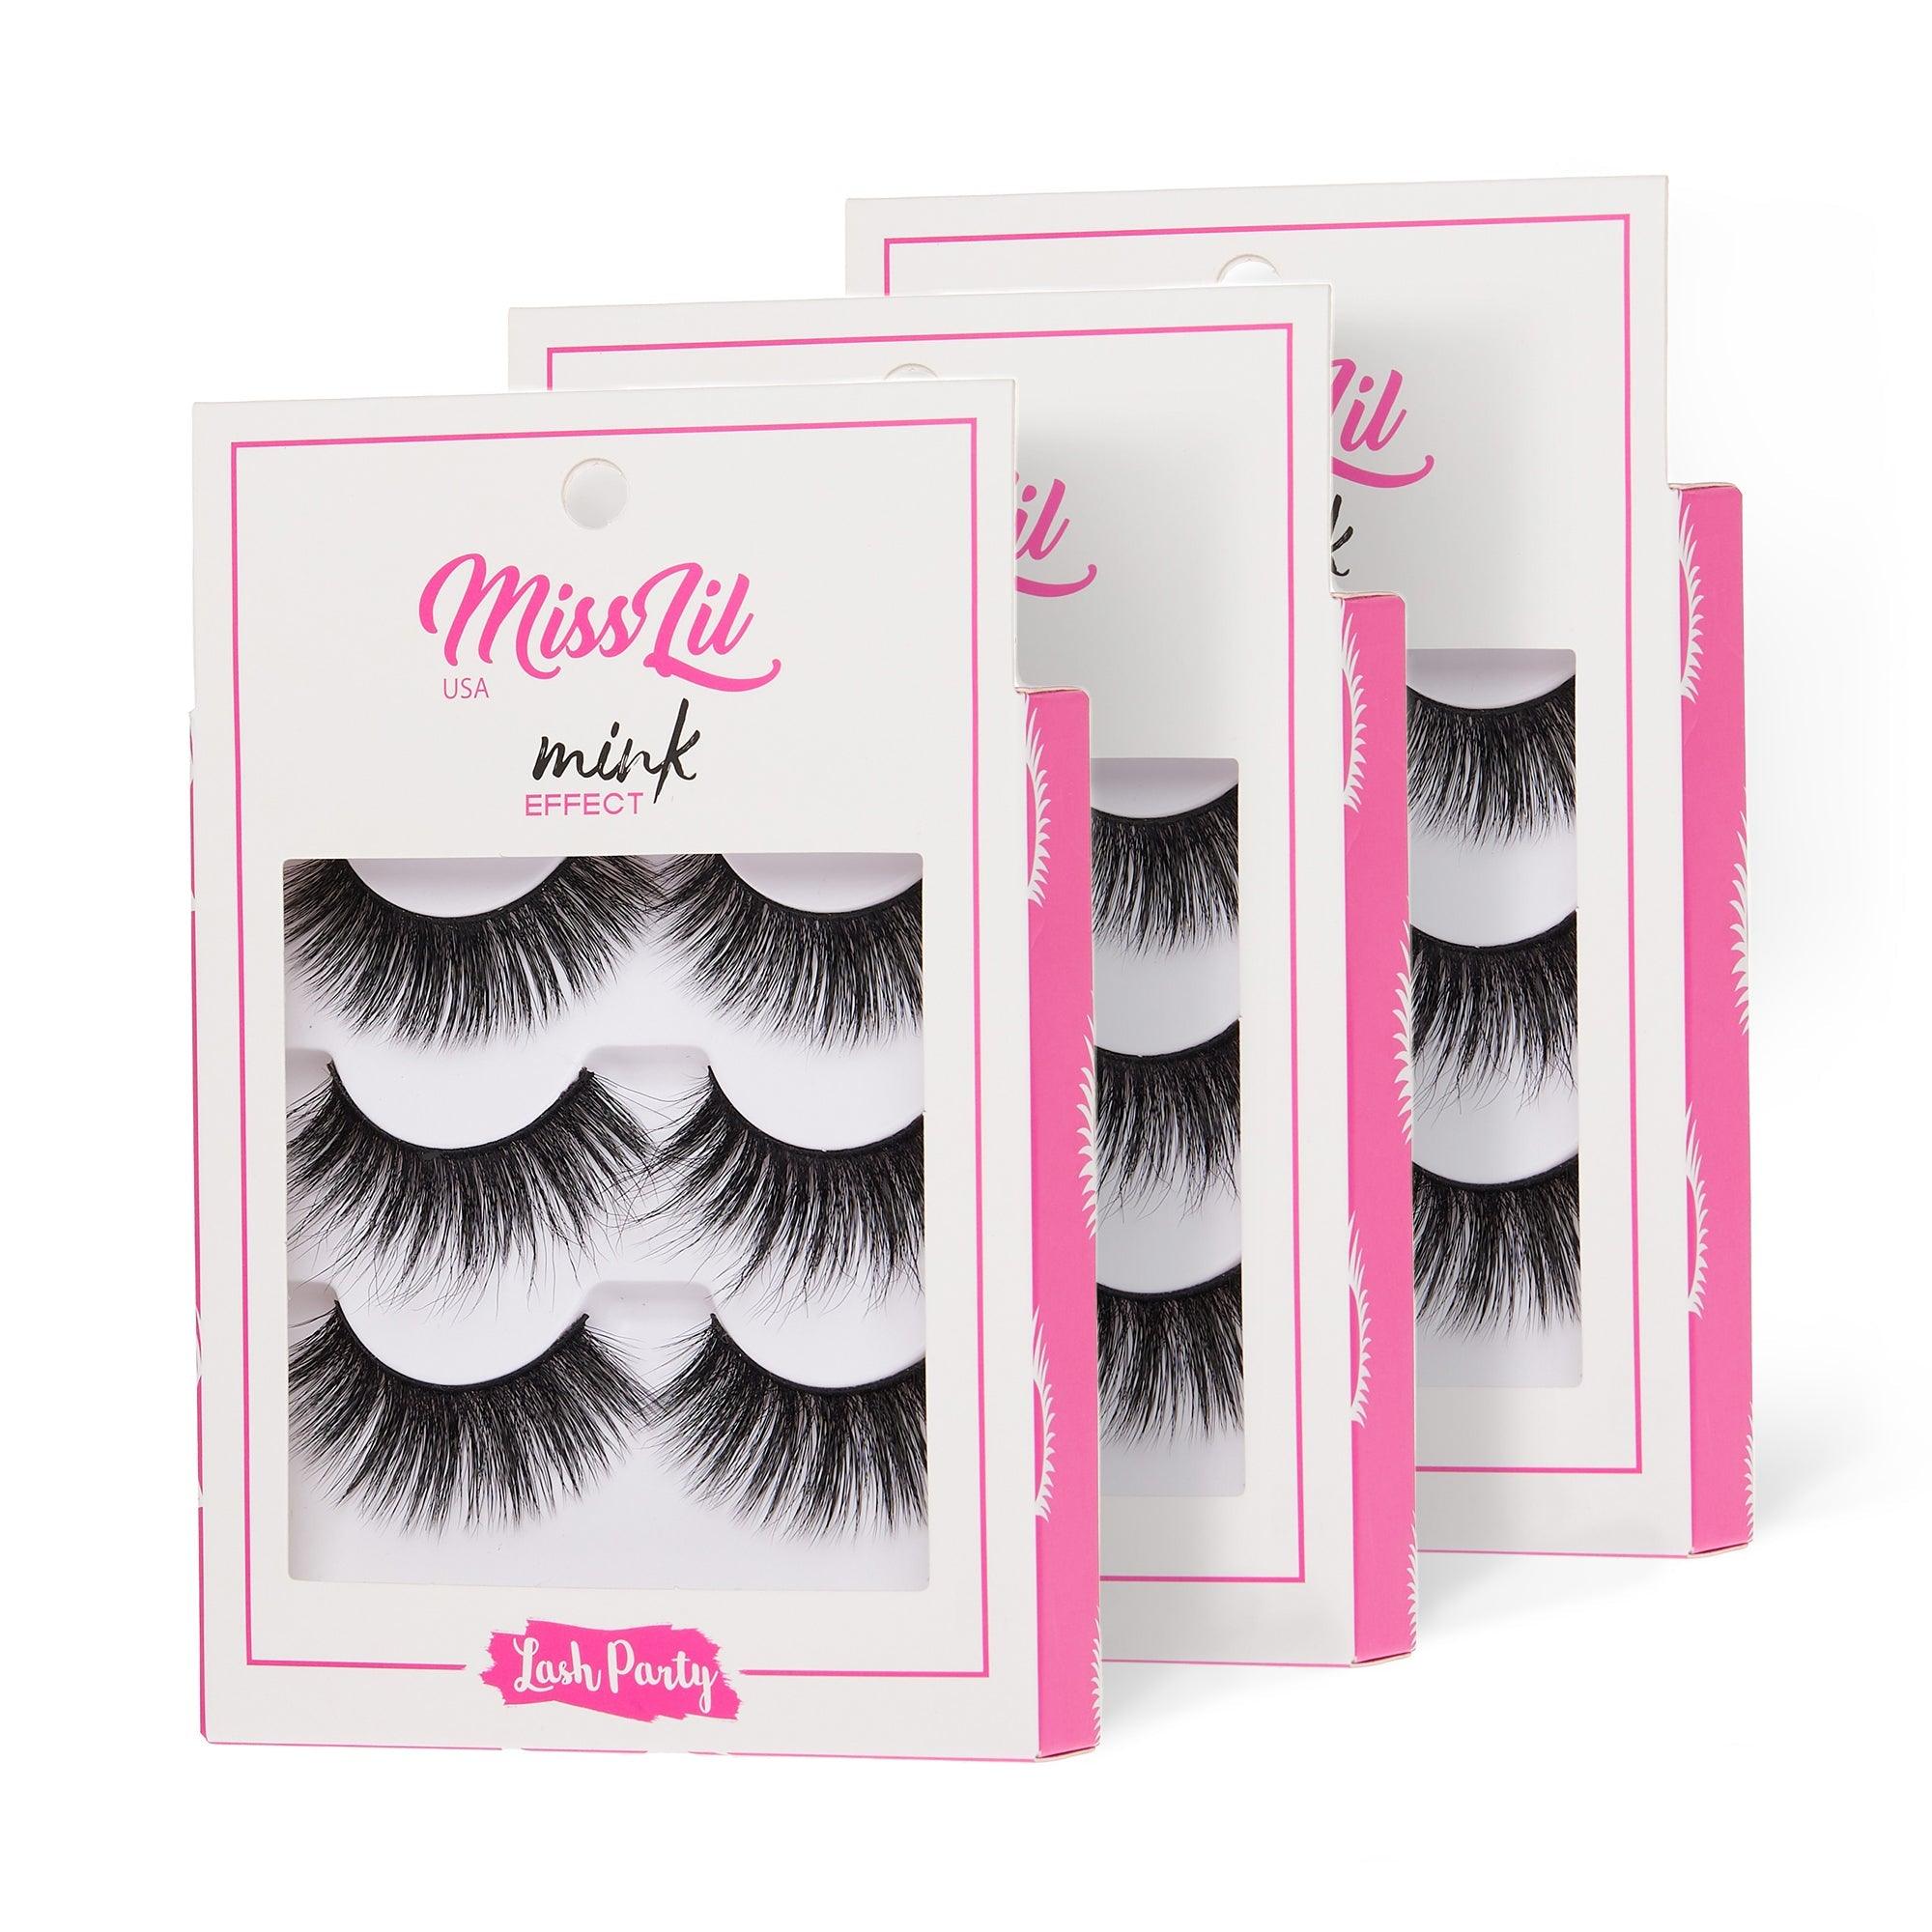 3-Pair Faux Mink Effect Eyelashes - Lash Party Collection #12 - Pack of 12 - Miss Lil USA